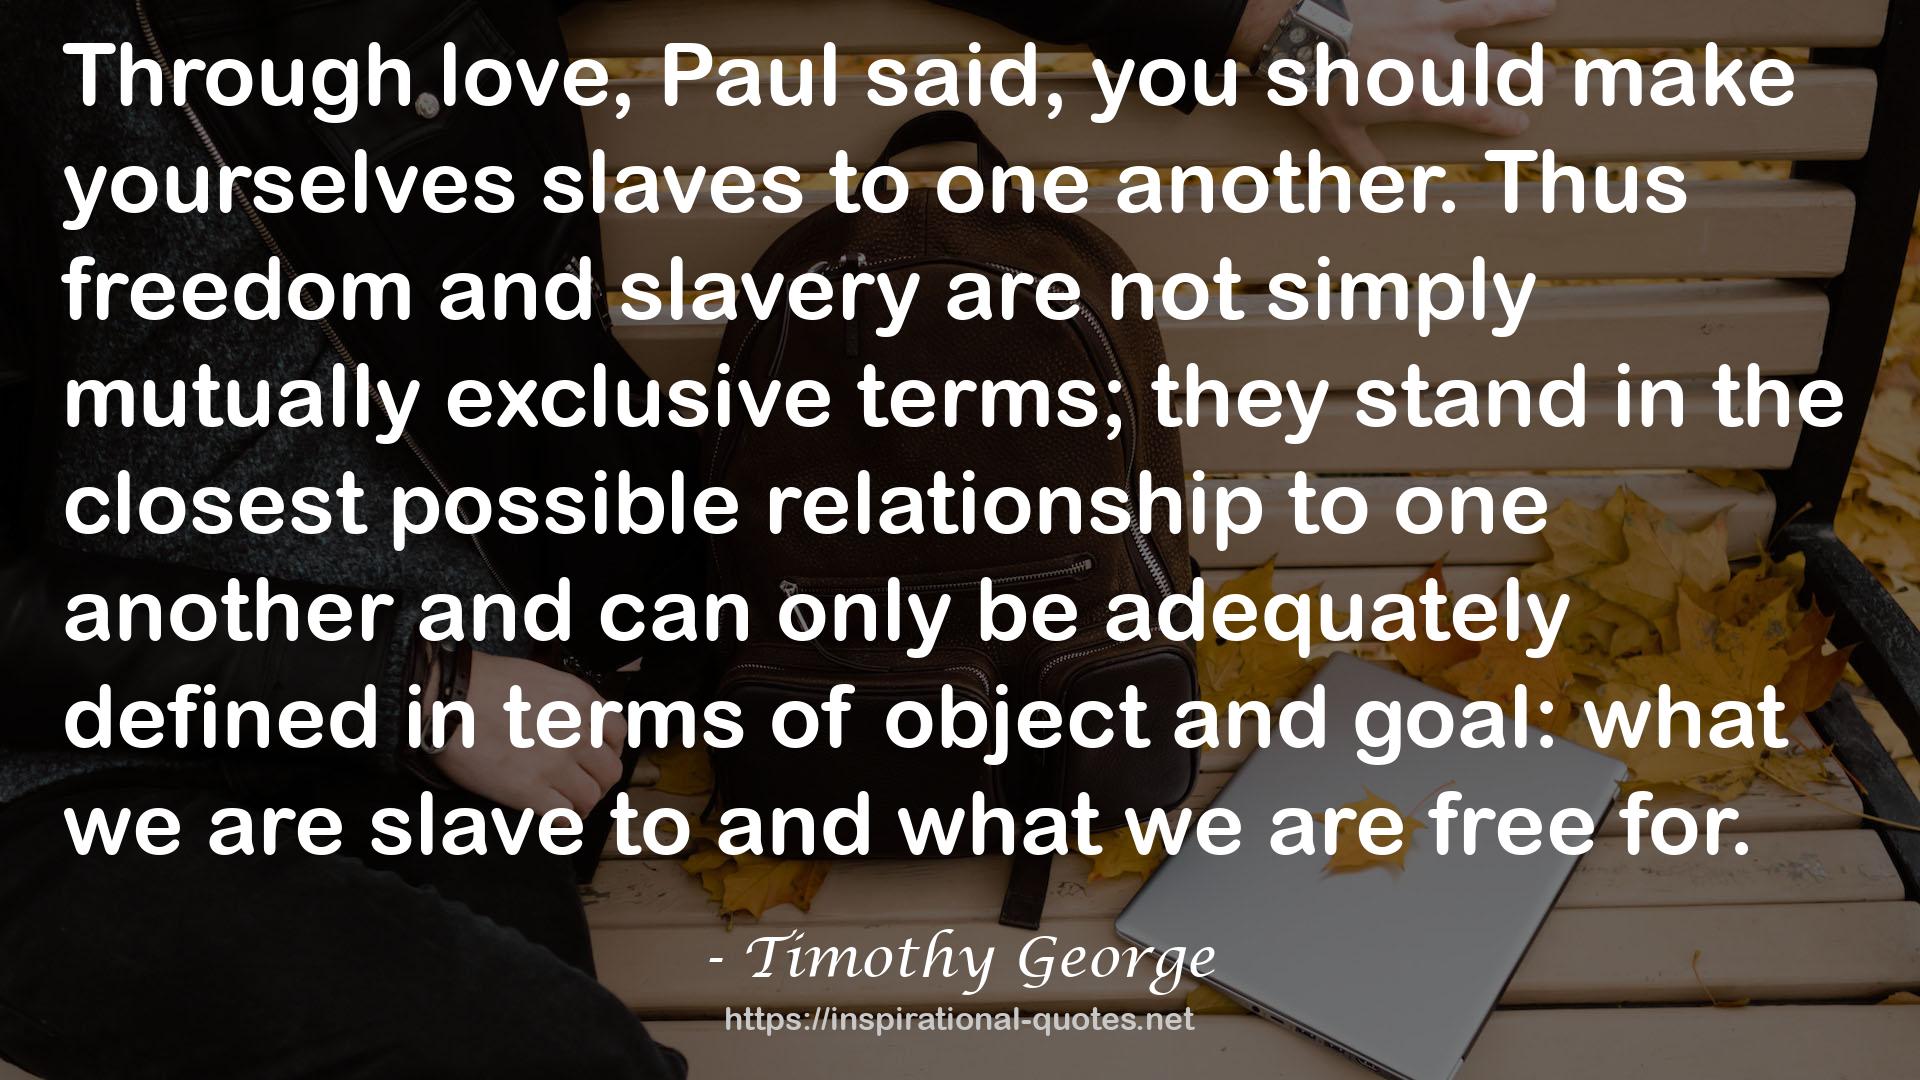 Timothy George QUOTES